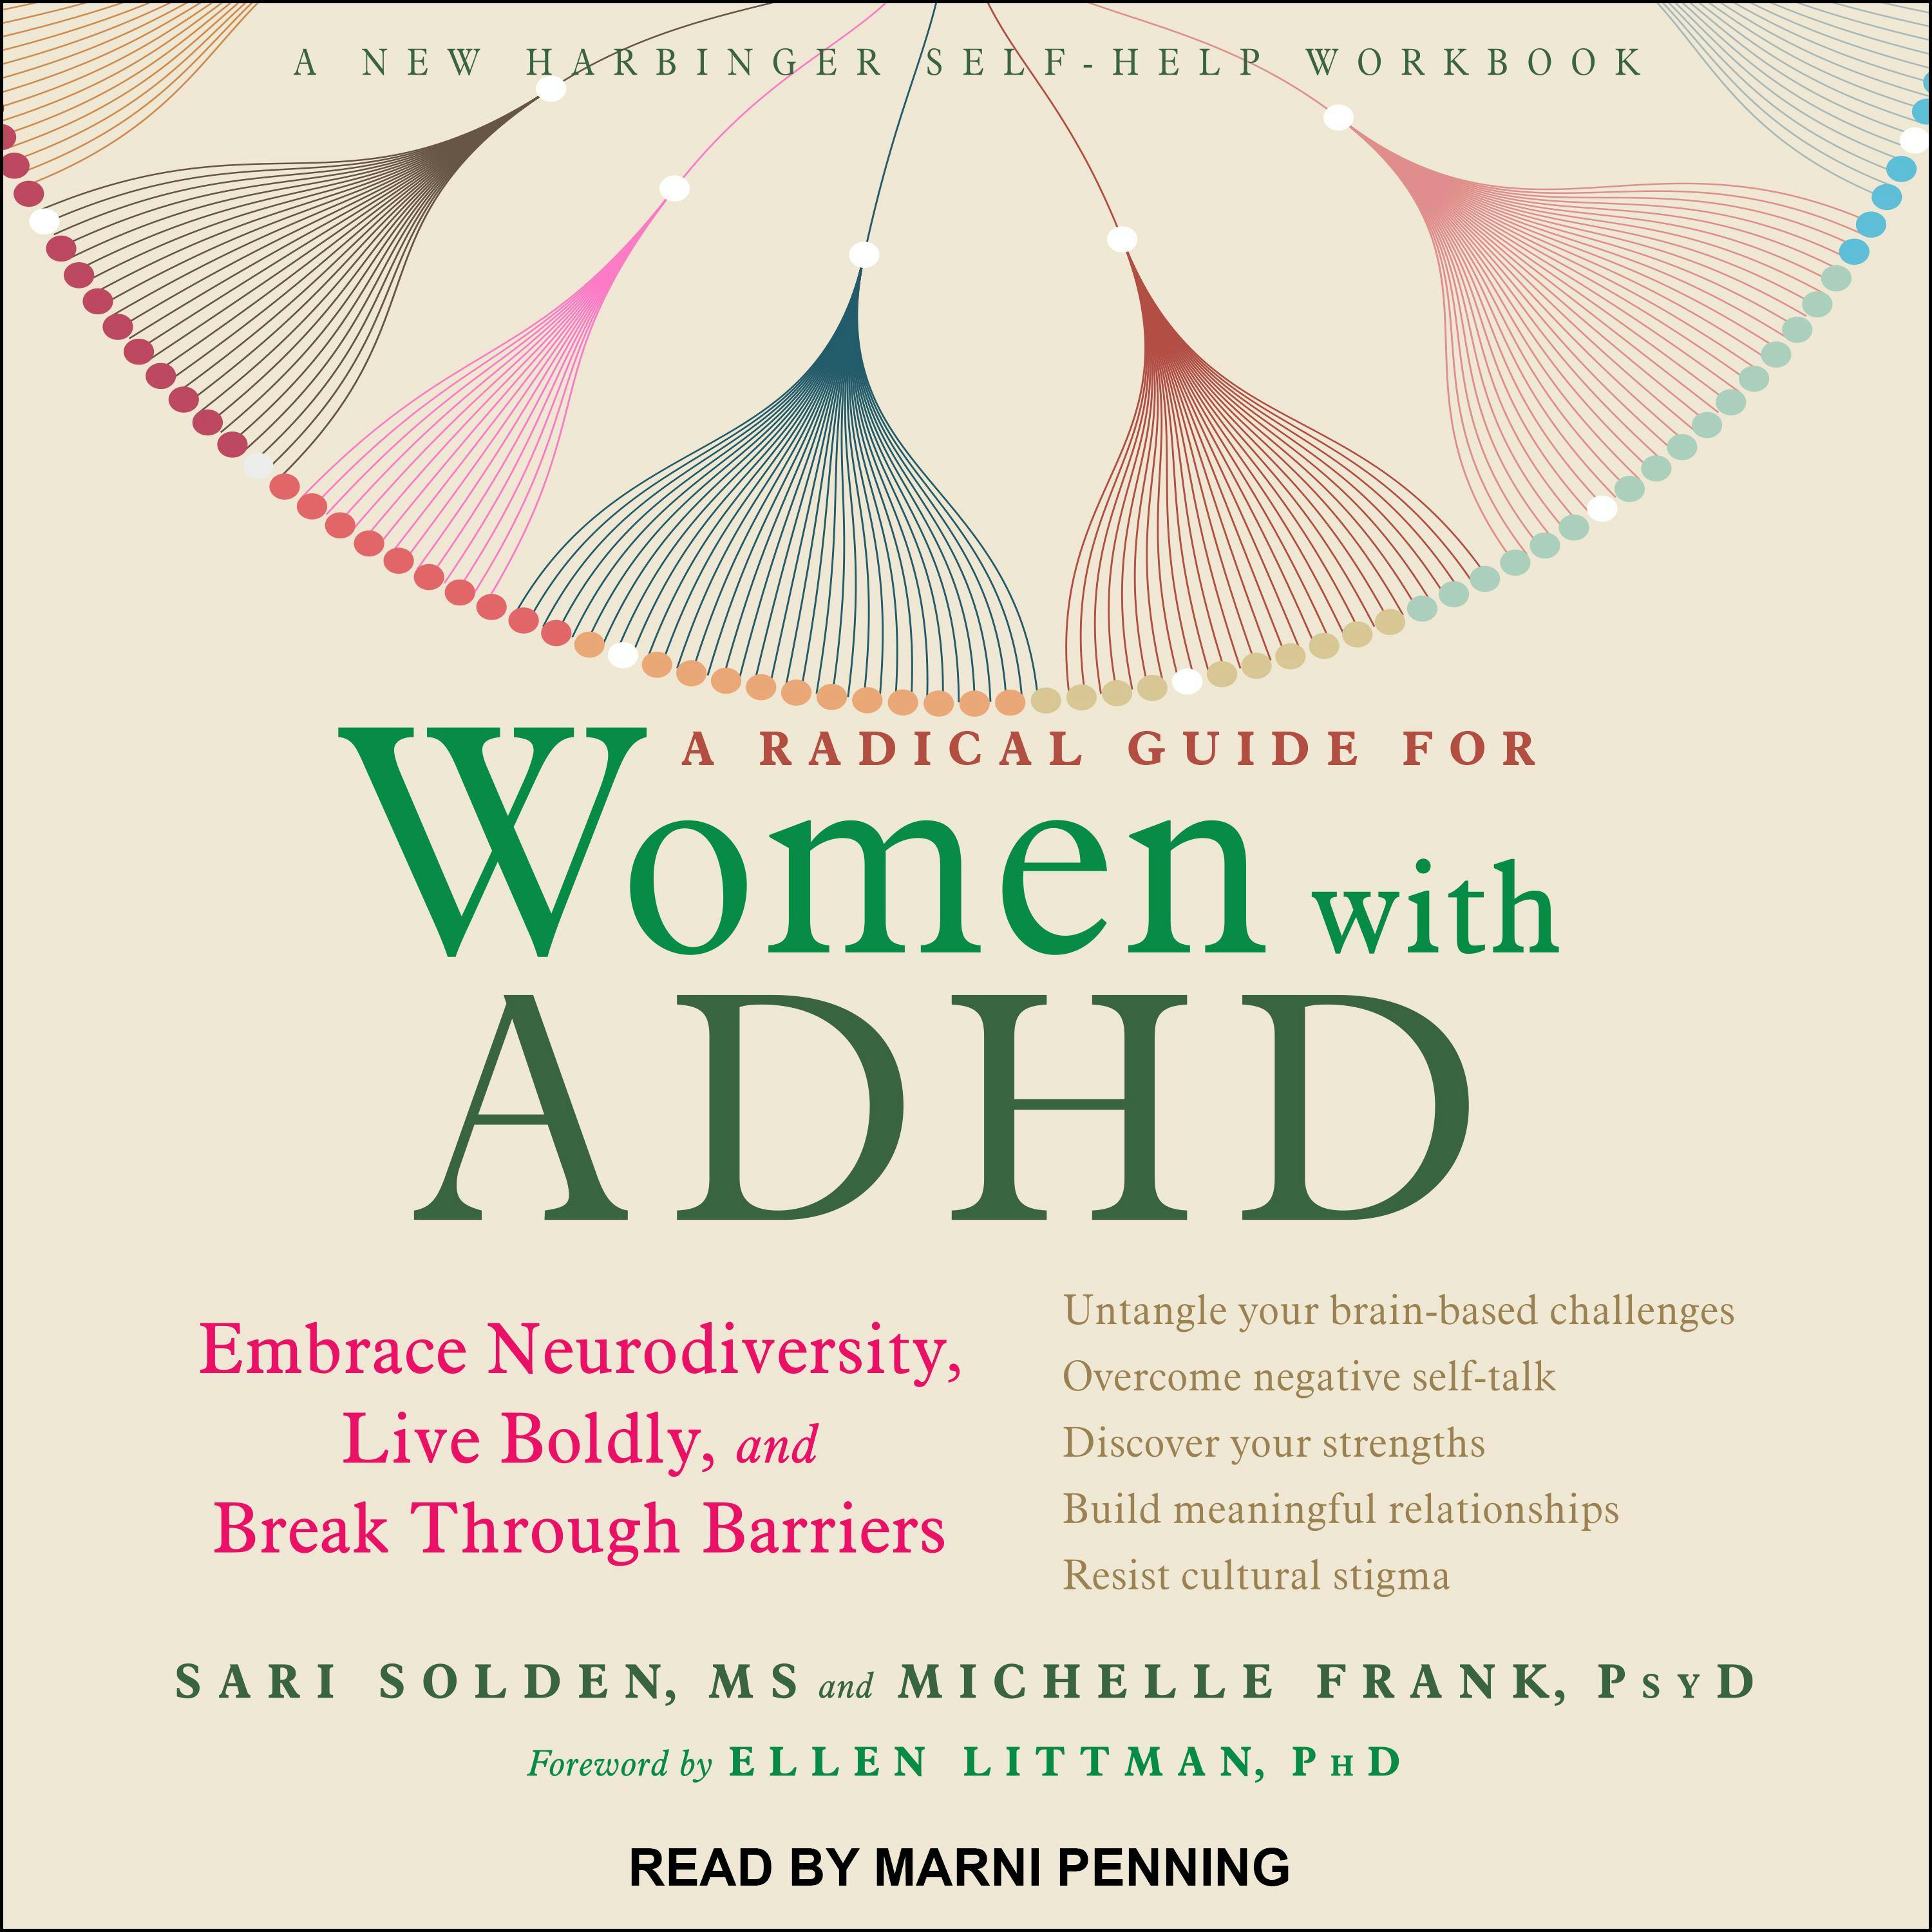 A Radical Guide for Women with ADHD: Embrace Neurodiversity, Live Boldly, and Break Through Barriers - PsyD Michelle Frank, MS, PhD